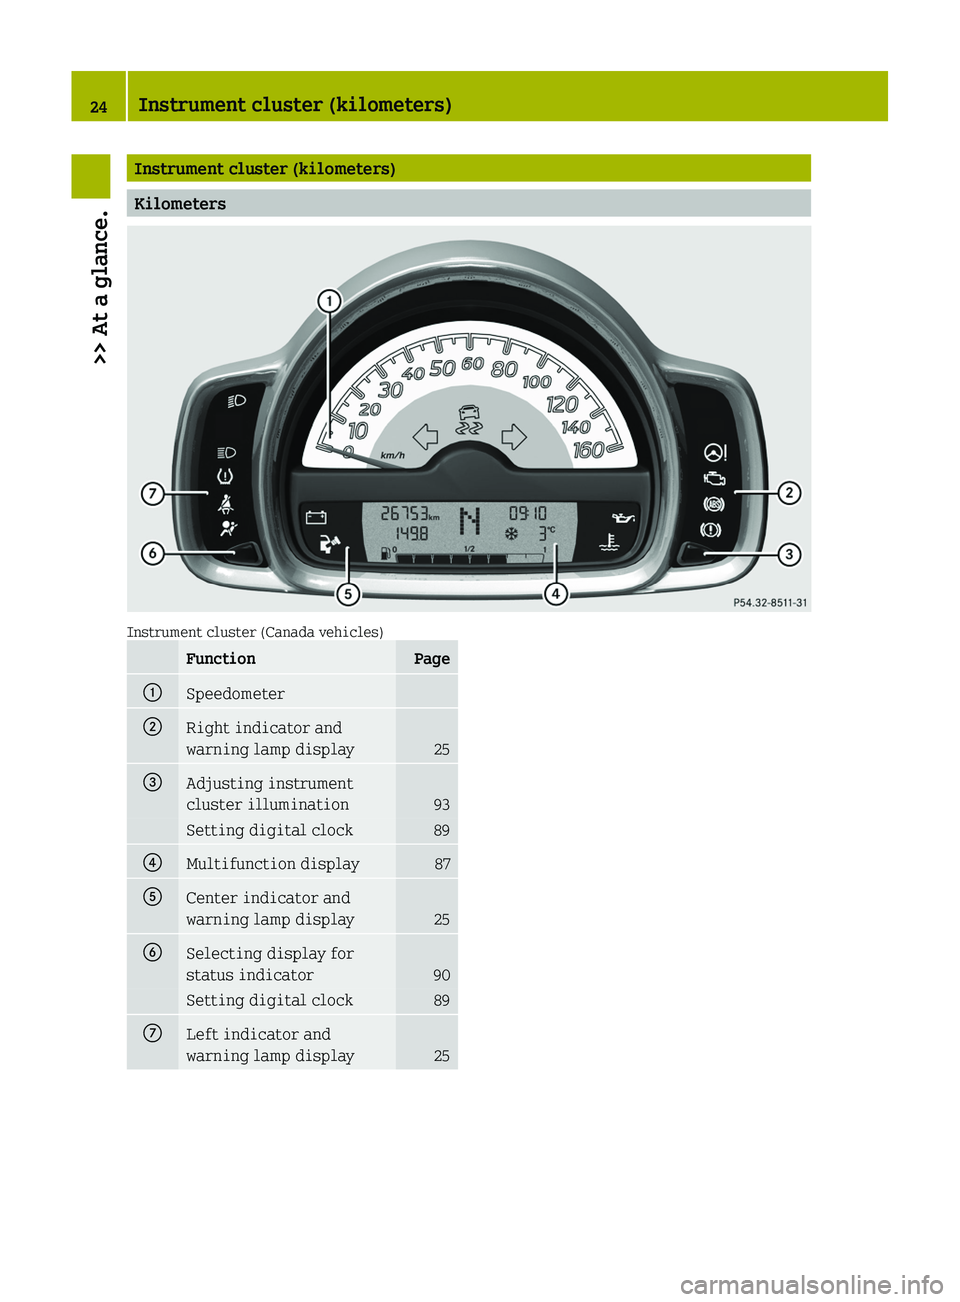 SMART FORTWO COUPE 2011 User Guide Instrument cluster (kilometers)
Kilometers
Instrument cluster (Canada vehicles)
FunctionPage0046Speedometer0047Right indicator and
warning lamp display
25
008AAdjusting instrument
cluster illumination